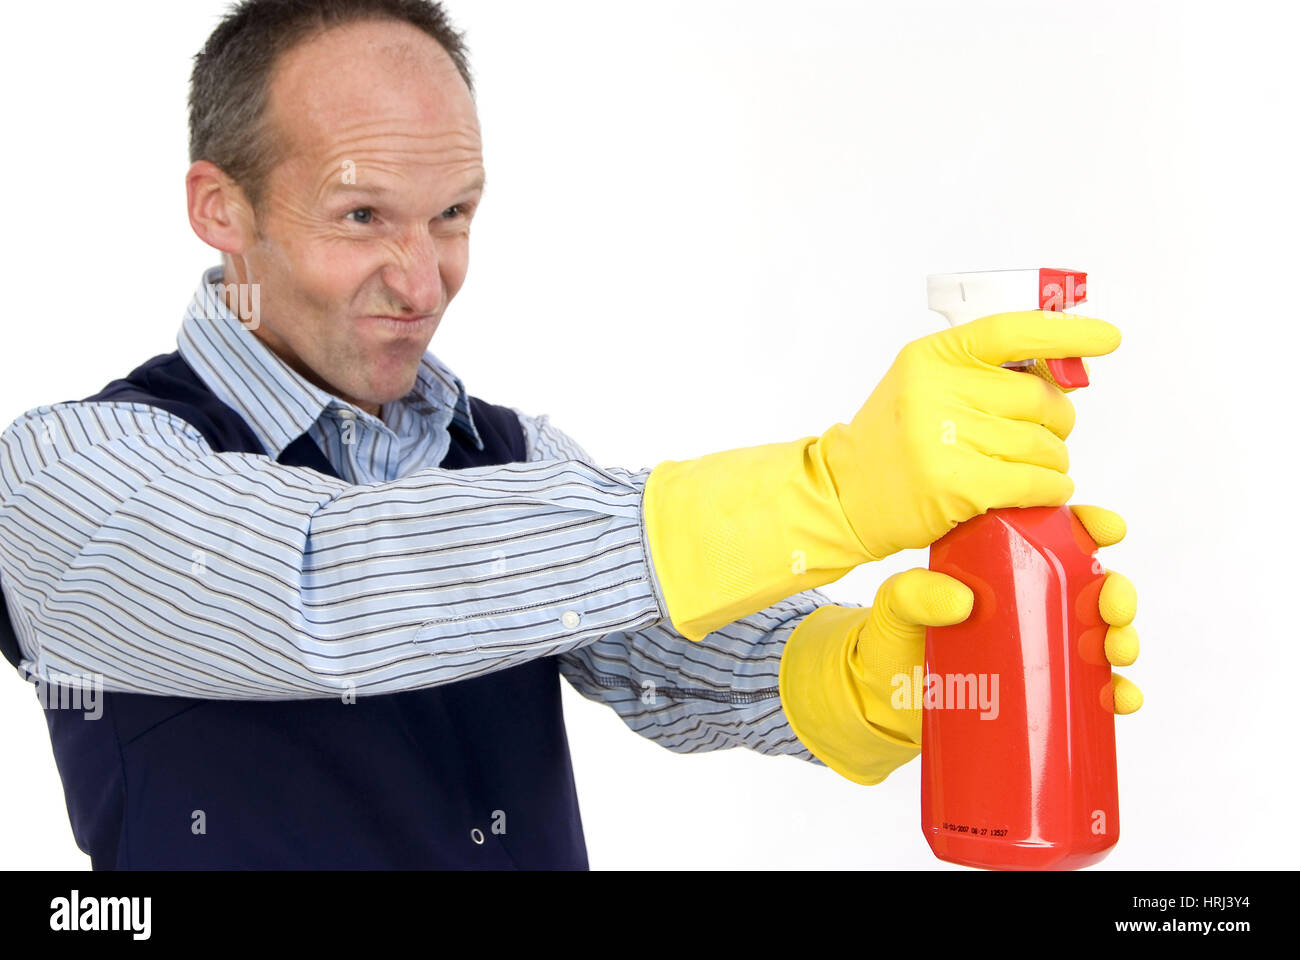 Putzmann with cleaning material - charman Stock Photo